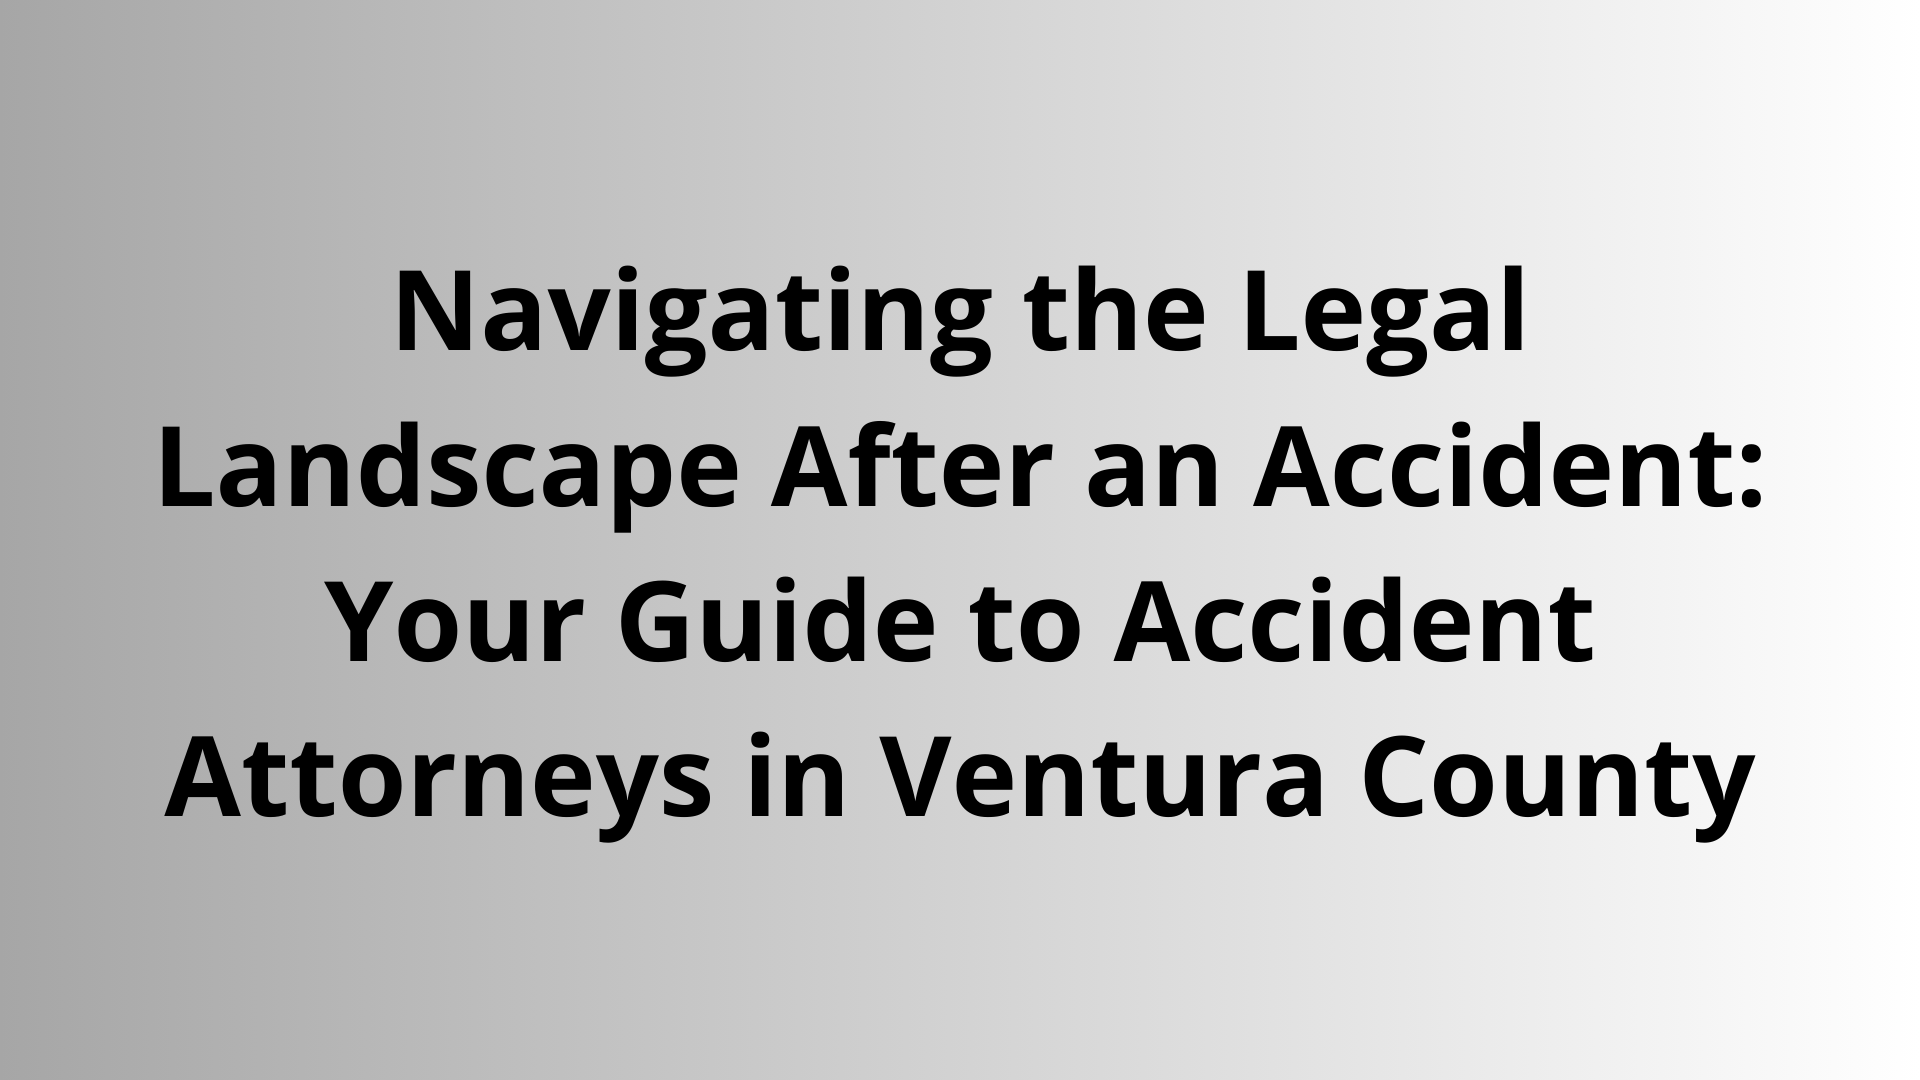 Navigating the Legal Landscape After an Accident